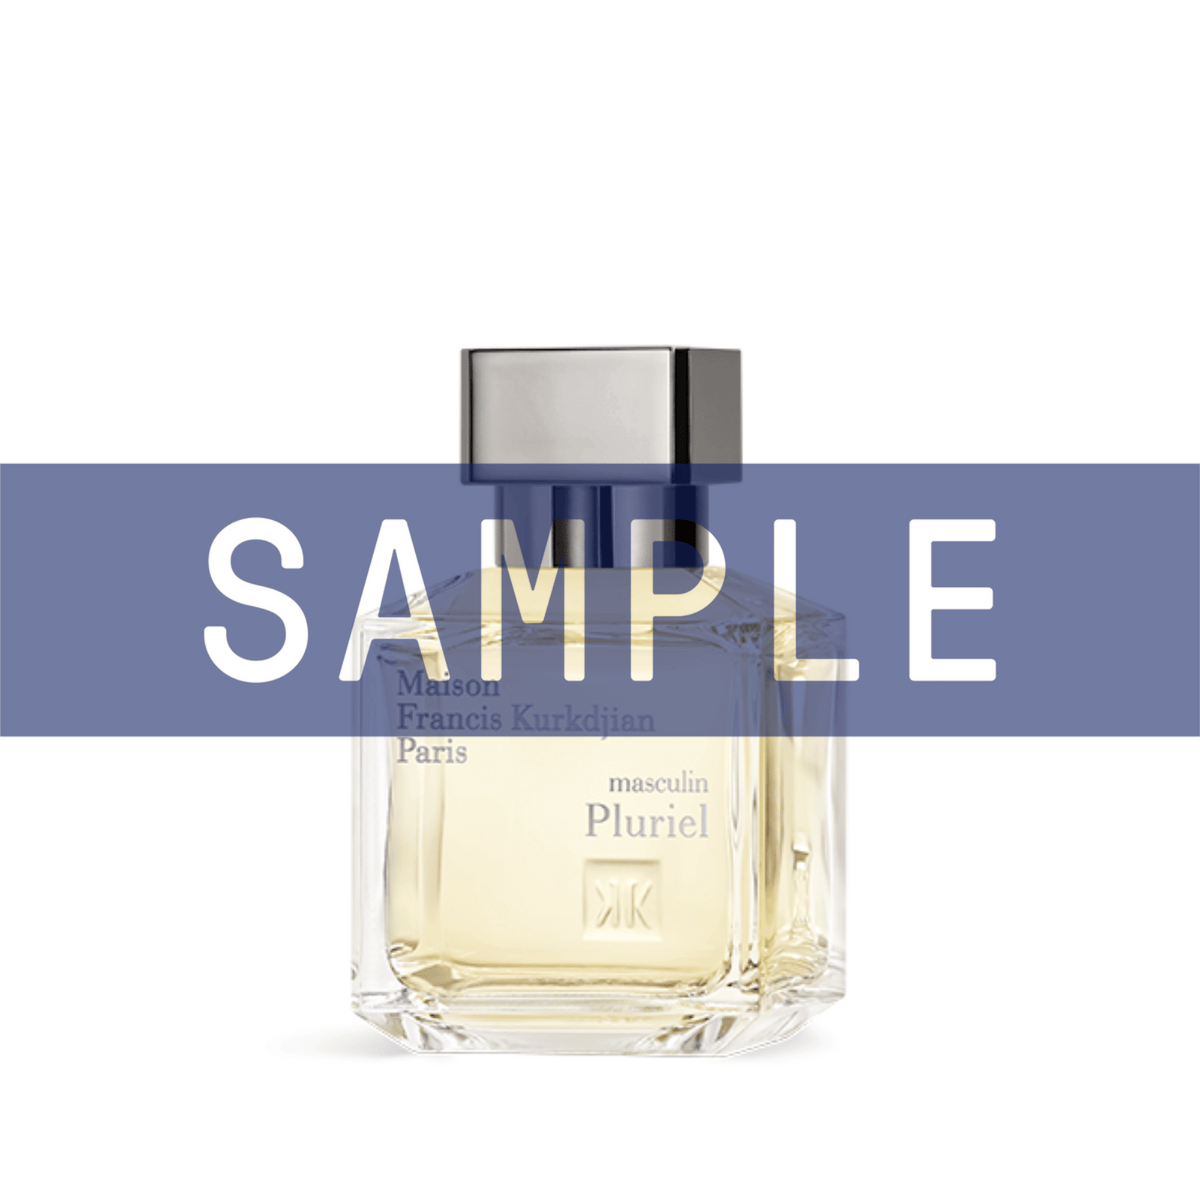 Primary Image of Sample - Masculin Pluriel EDT